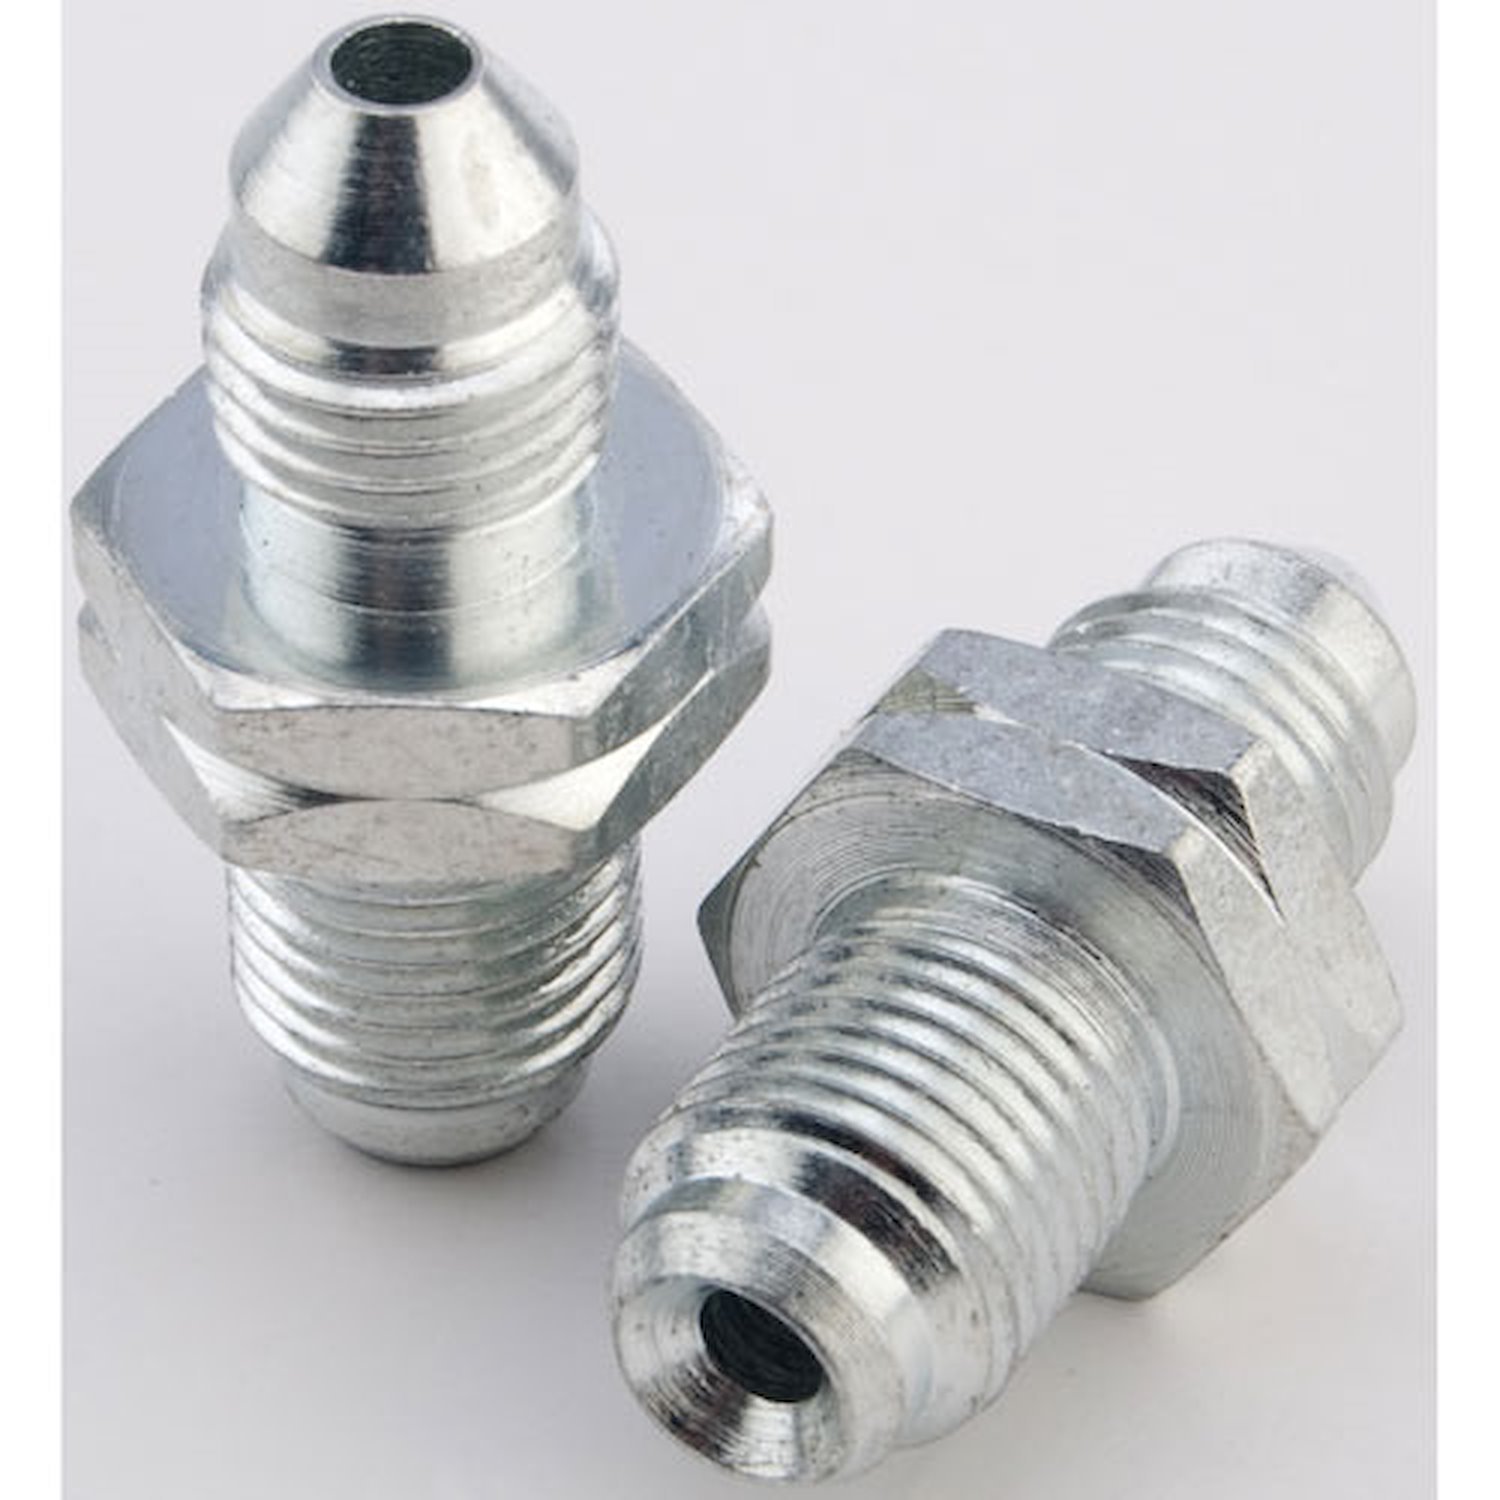 AN to Bubble Flare Male Caliper Fittings [-3